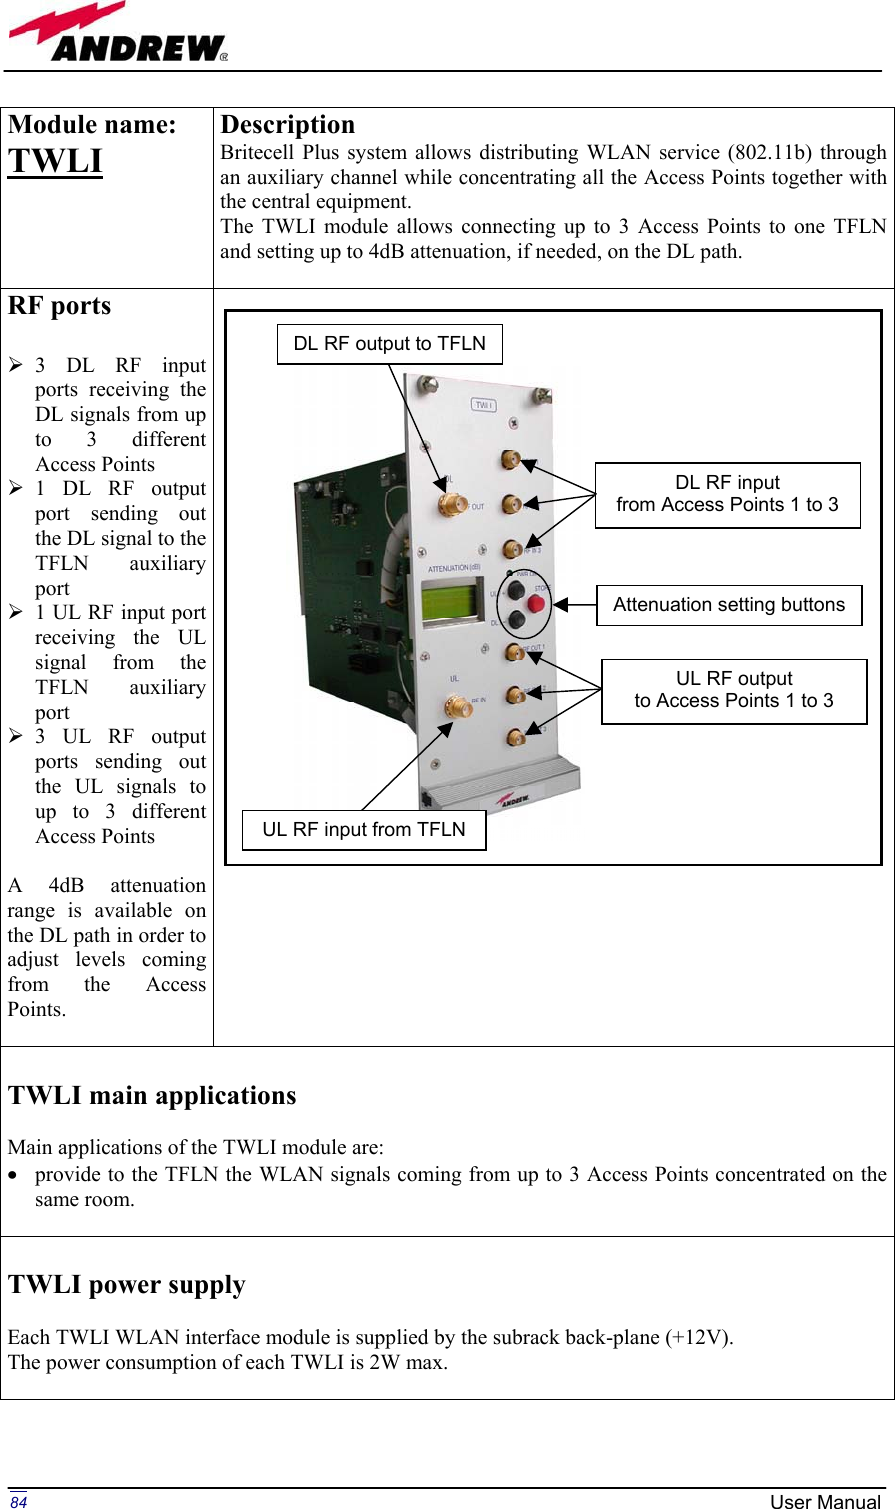 Page 84 of Andrew Wireless Innovations Group BCP-TFAM23 Model TFAM23 Downlink Booster User Manual MN024 04 rev3